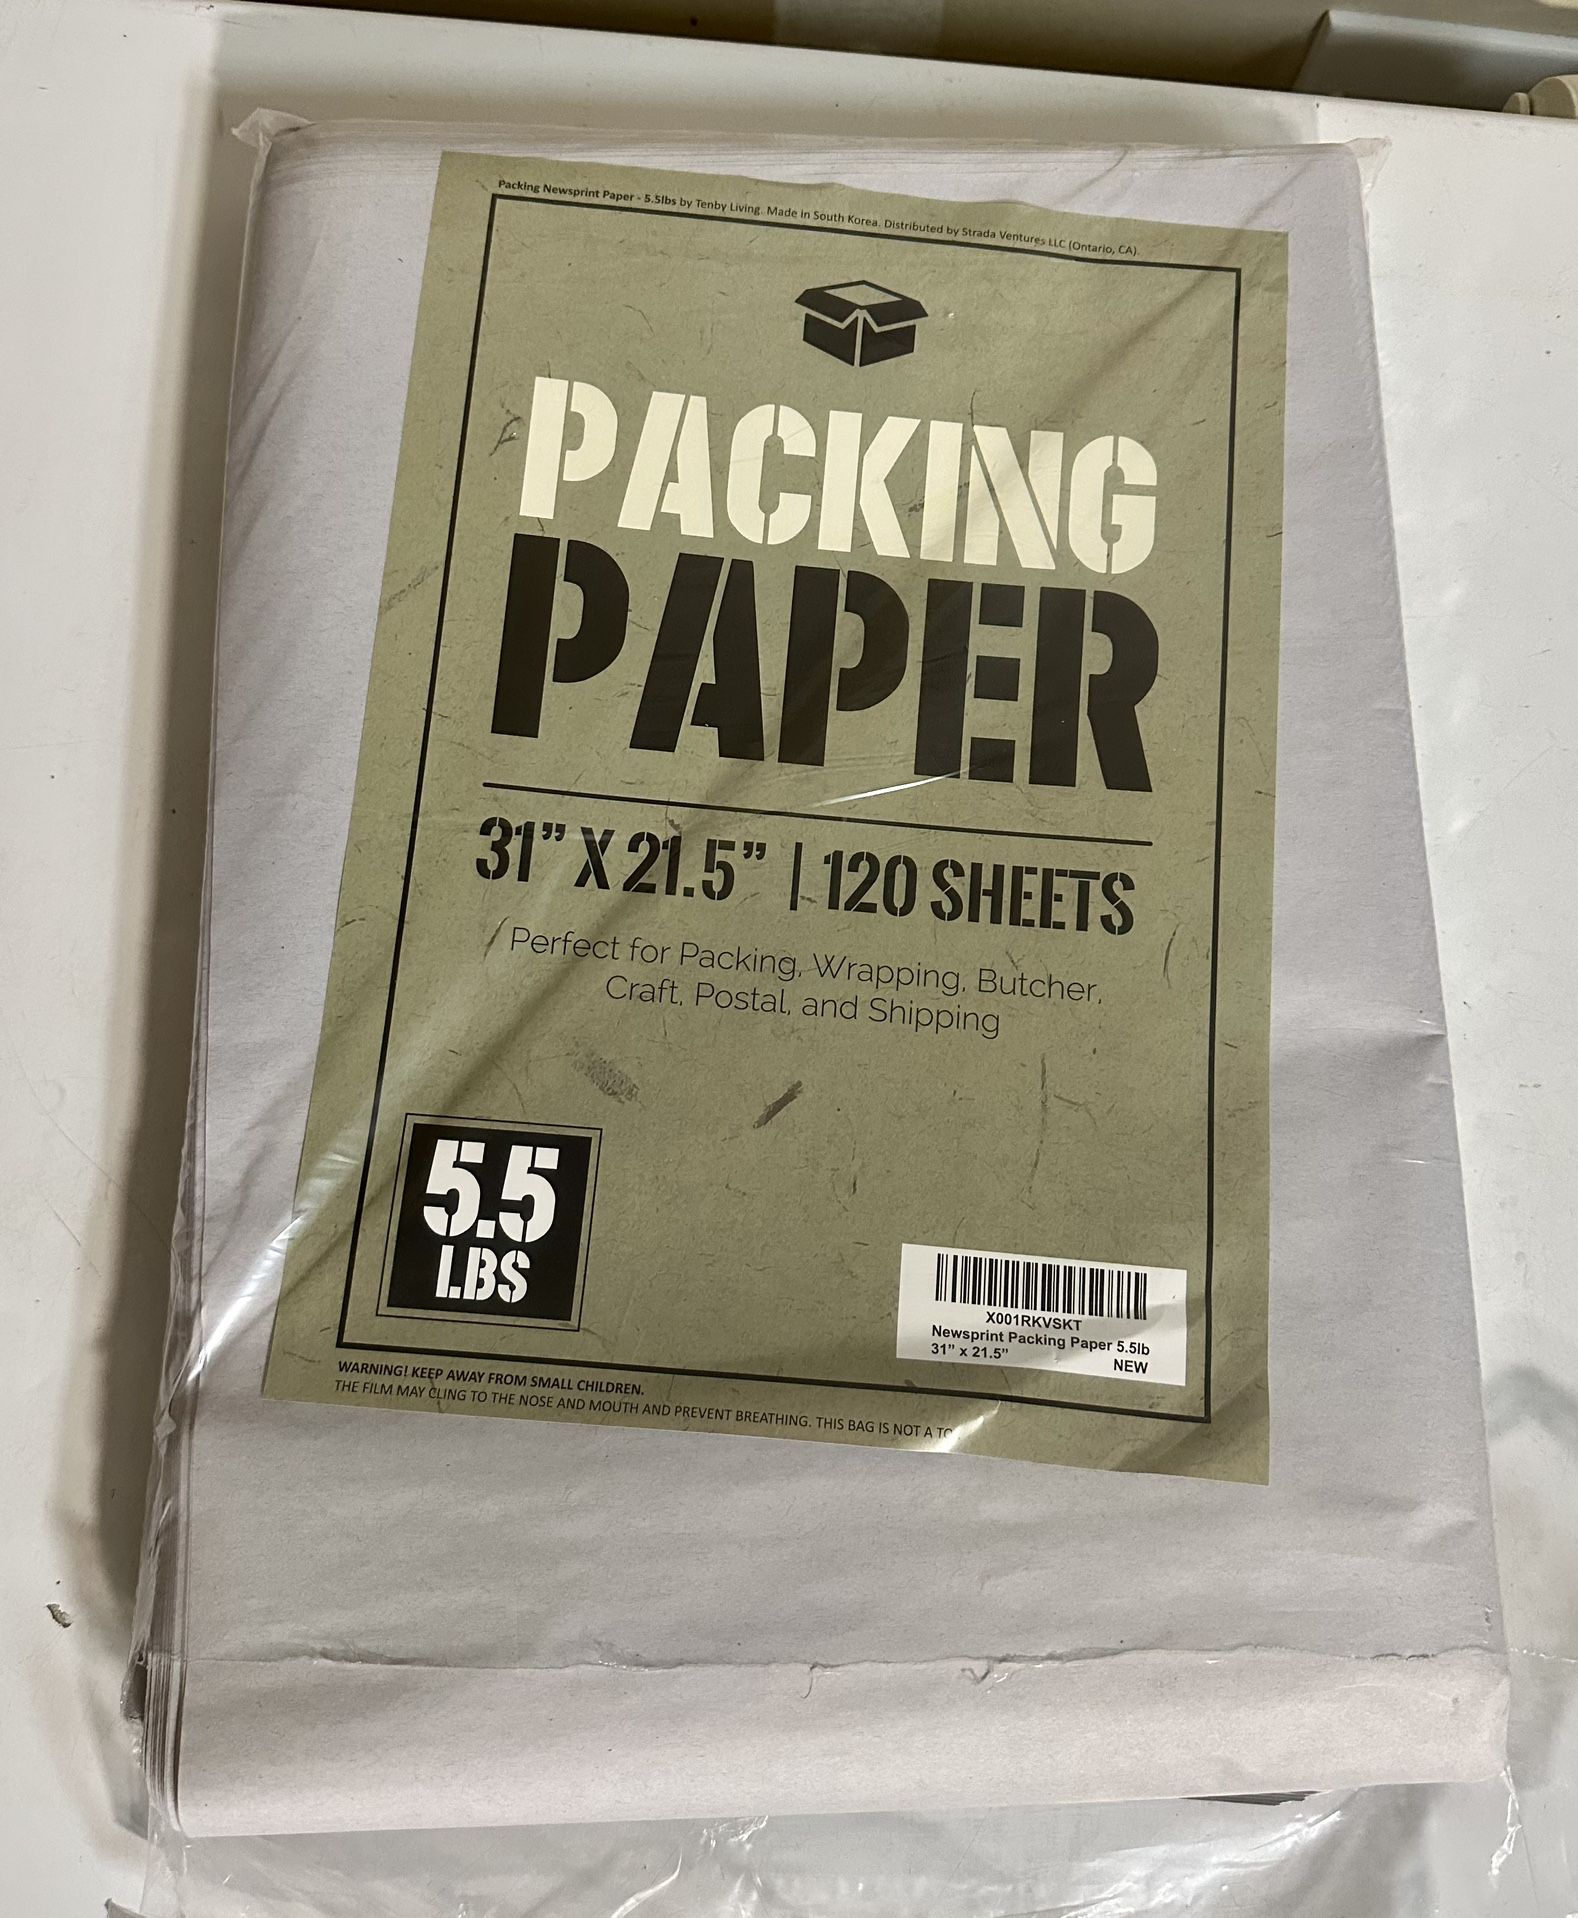 Moving Packing Paper: 5.5 lbs of Uncoated, Unbleached, and Unwaxed